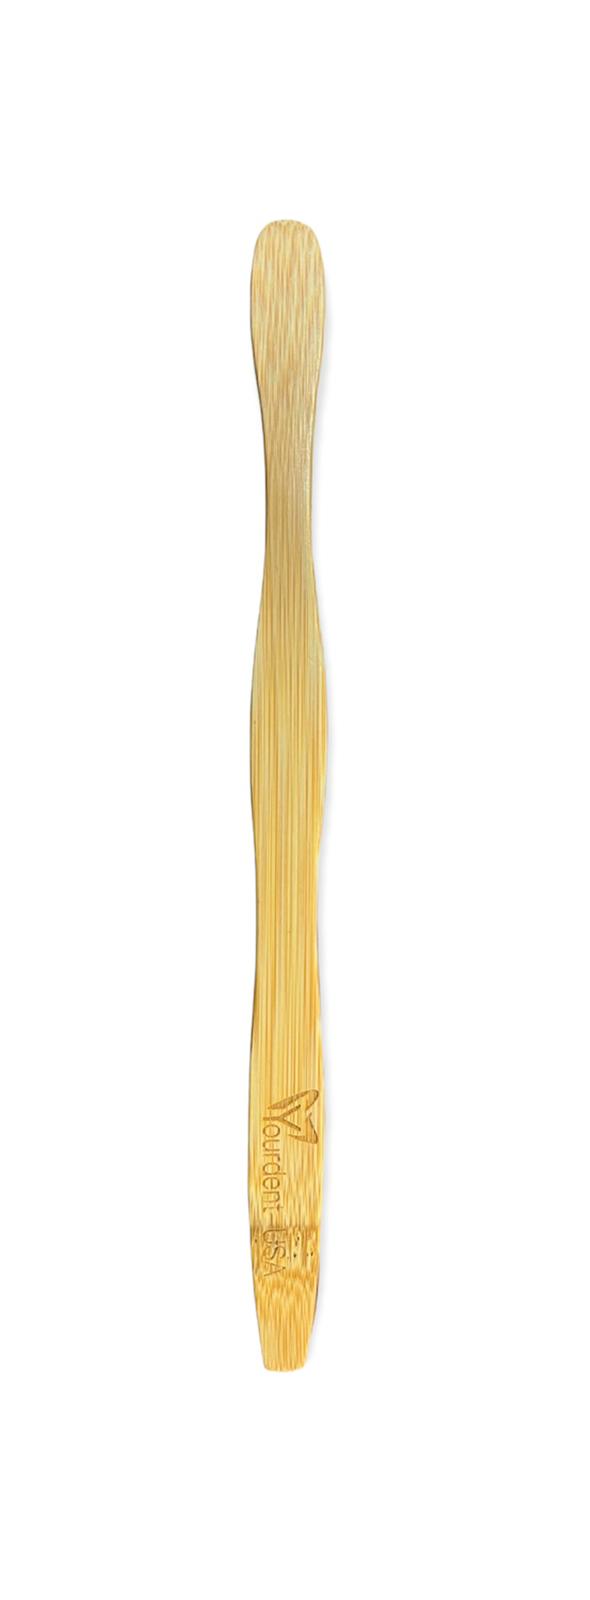 Yourdent-USA 100% Biodegradable Bamboo Toothbrush, Soft Bristles, Ergonomic Handle!! 6 Pack!! for Adults!